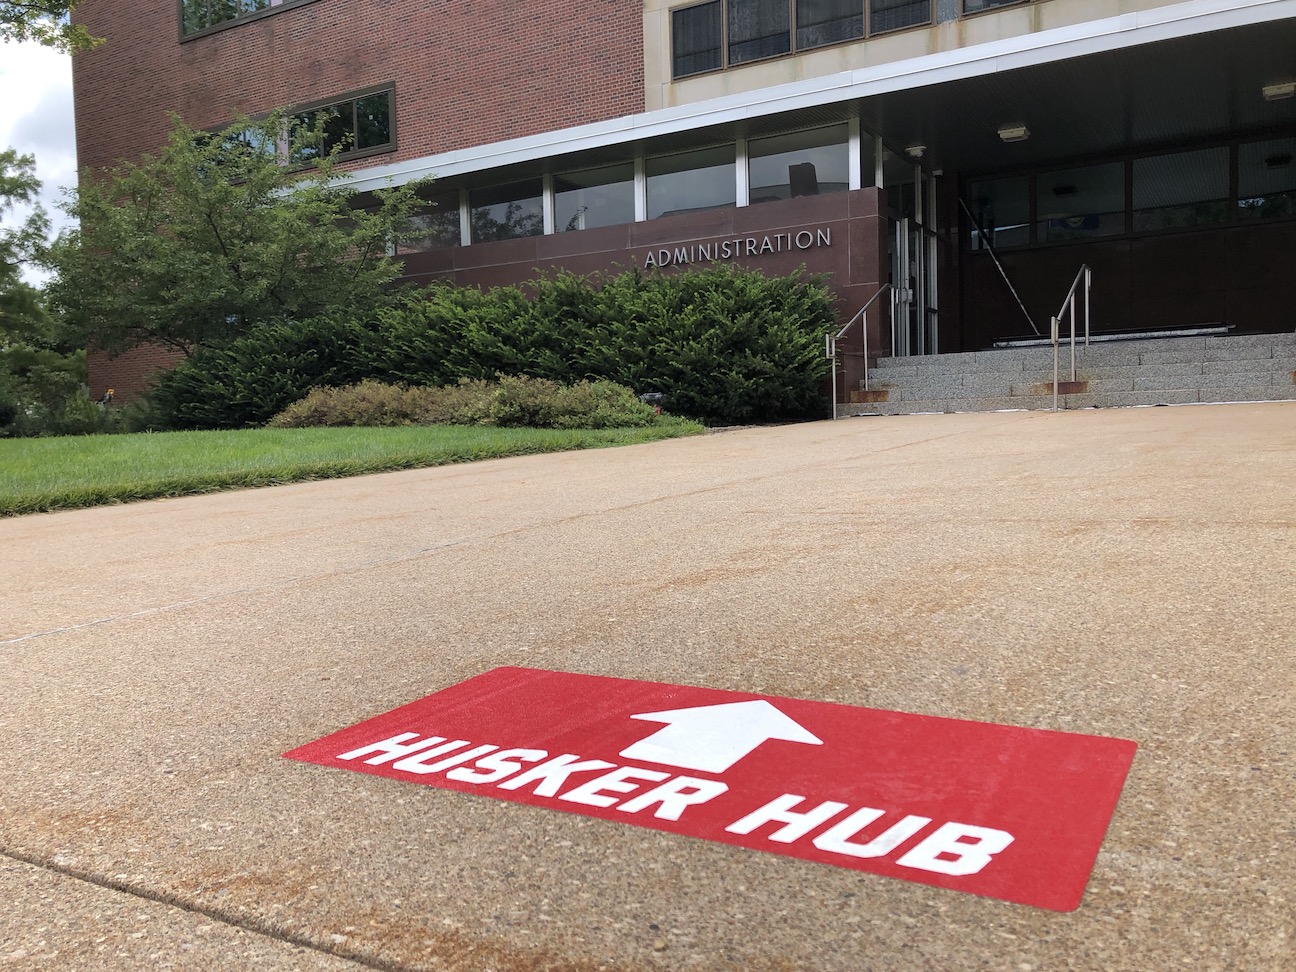 Husker Hub's new location is on the first floor of Canfield Administration Building.